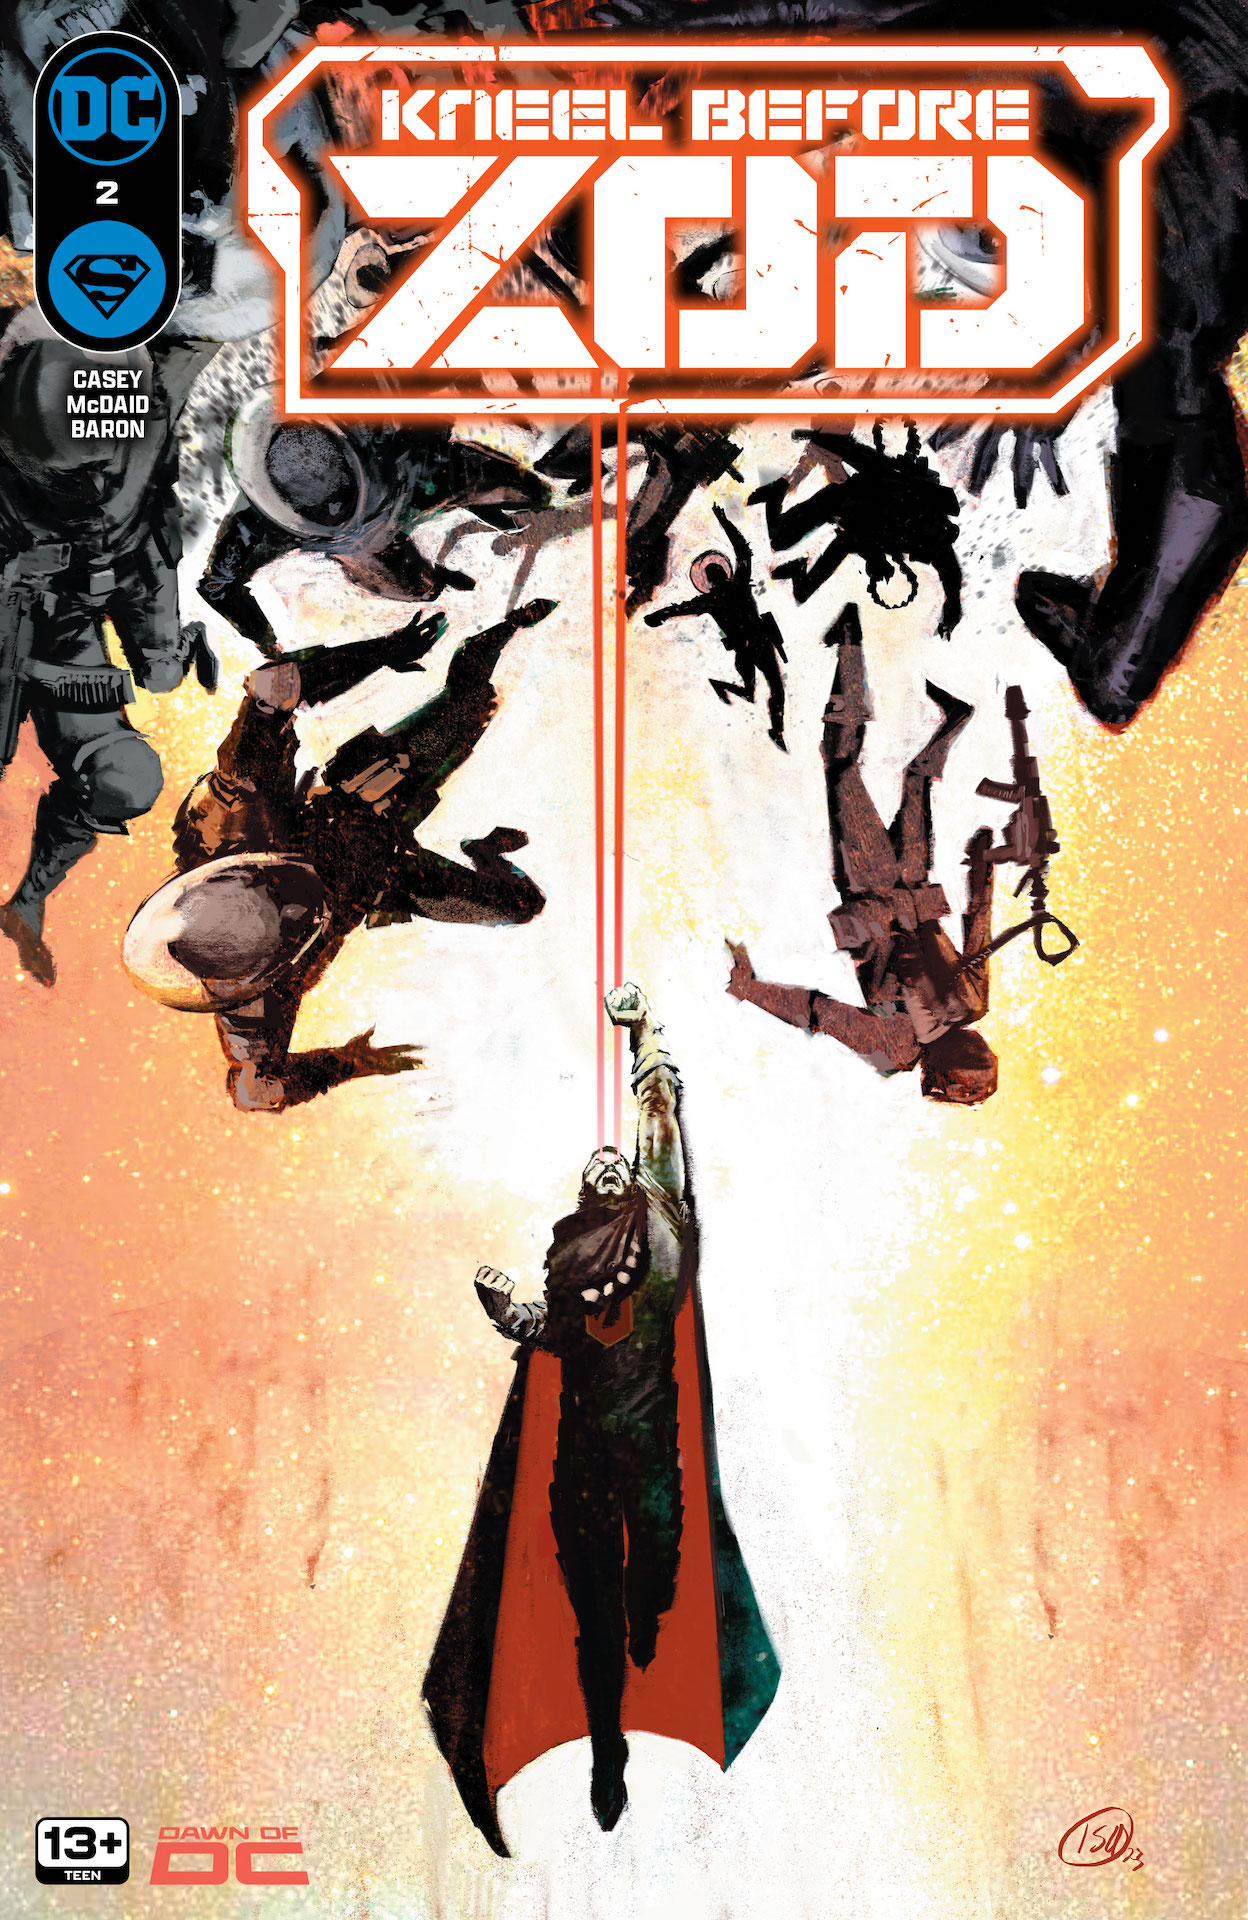 DC Preview: Kneel Before Zod #2